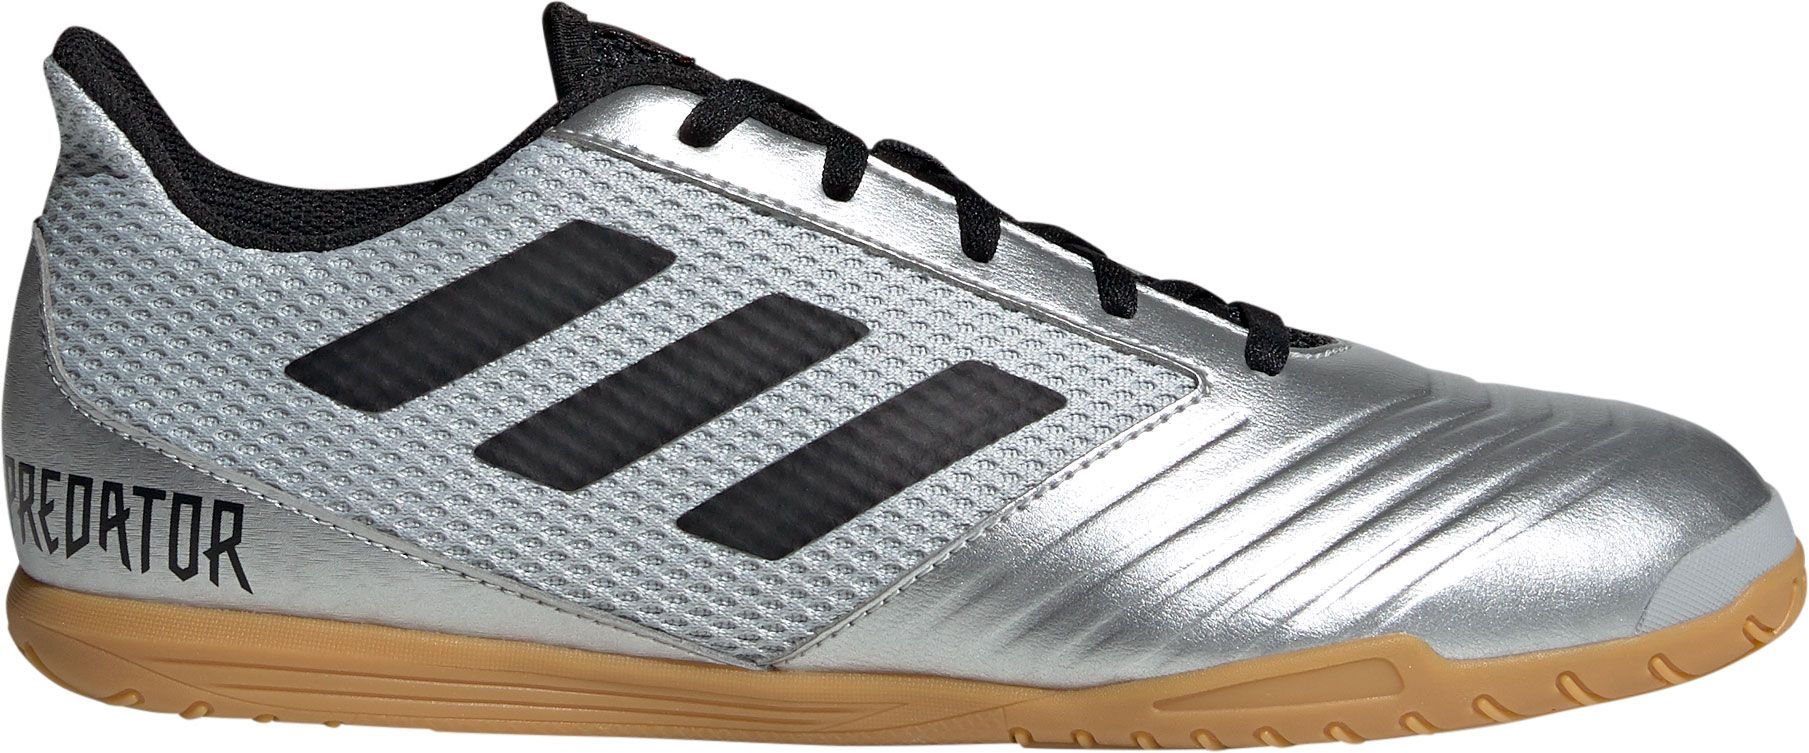 adidas outdoor soccer shoes